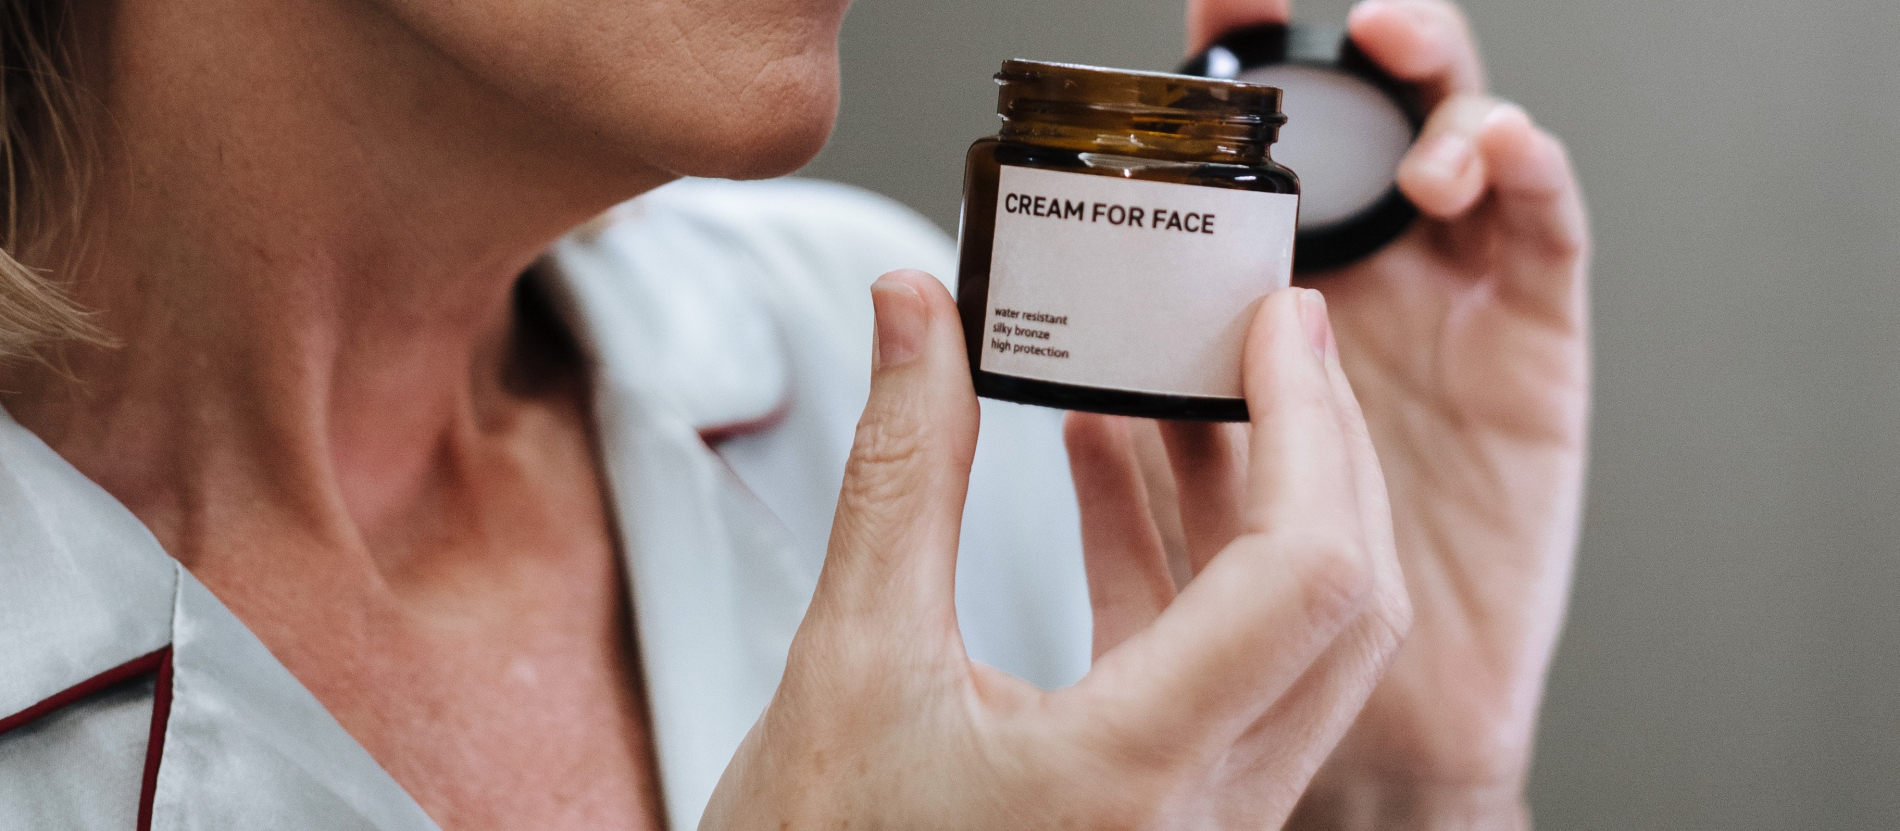 woman holding up a bottle that says "face cream"